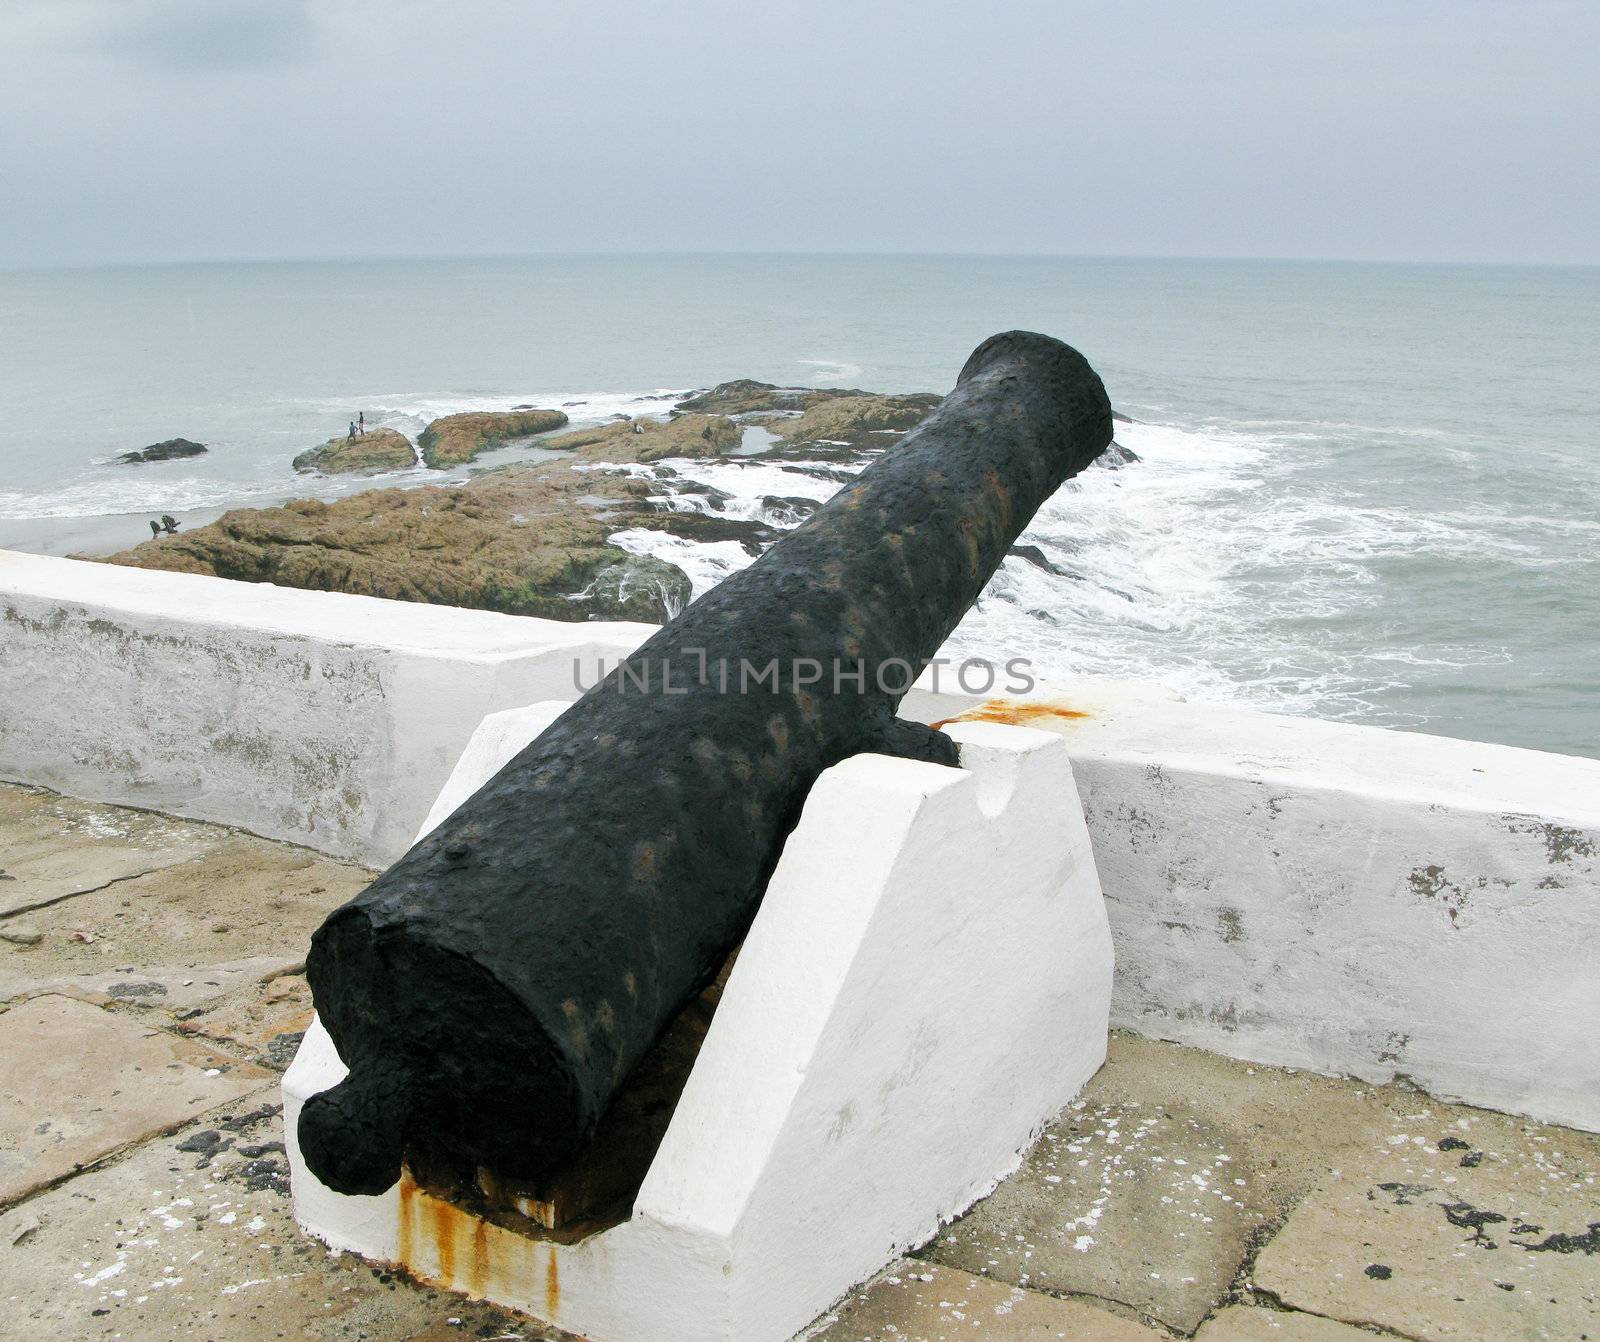 Elmina Castle was the exit port for slaves from Ghana in Africa. This is a rusted cannon